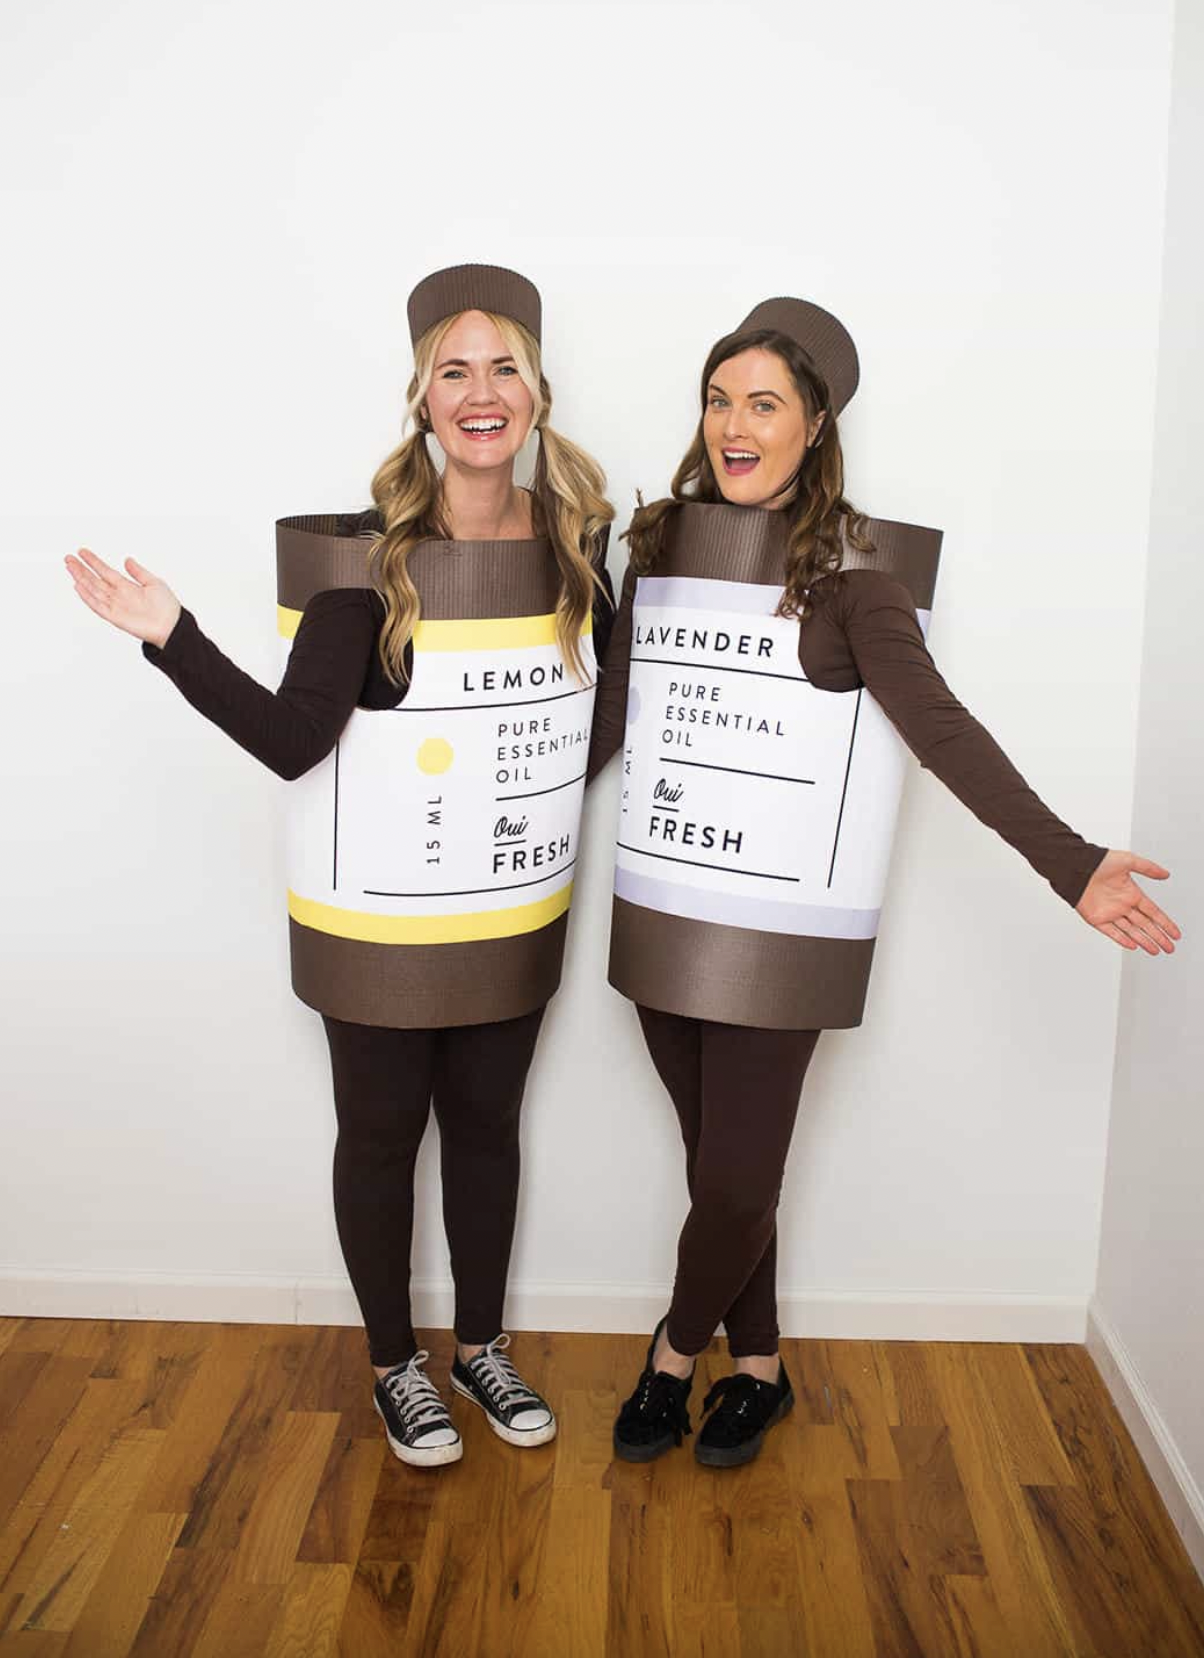 funny costumes 2022 ideas